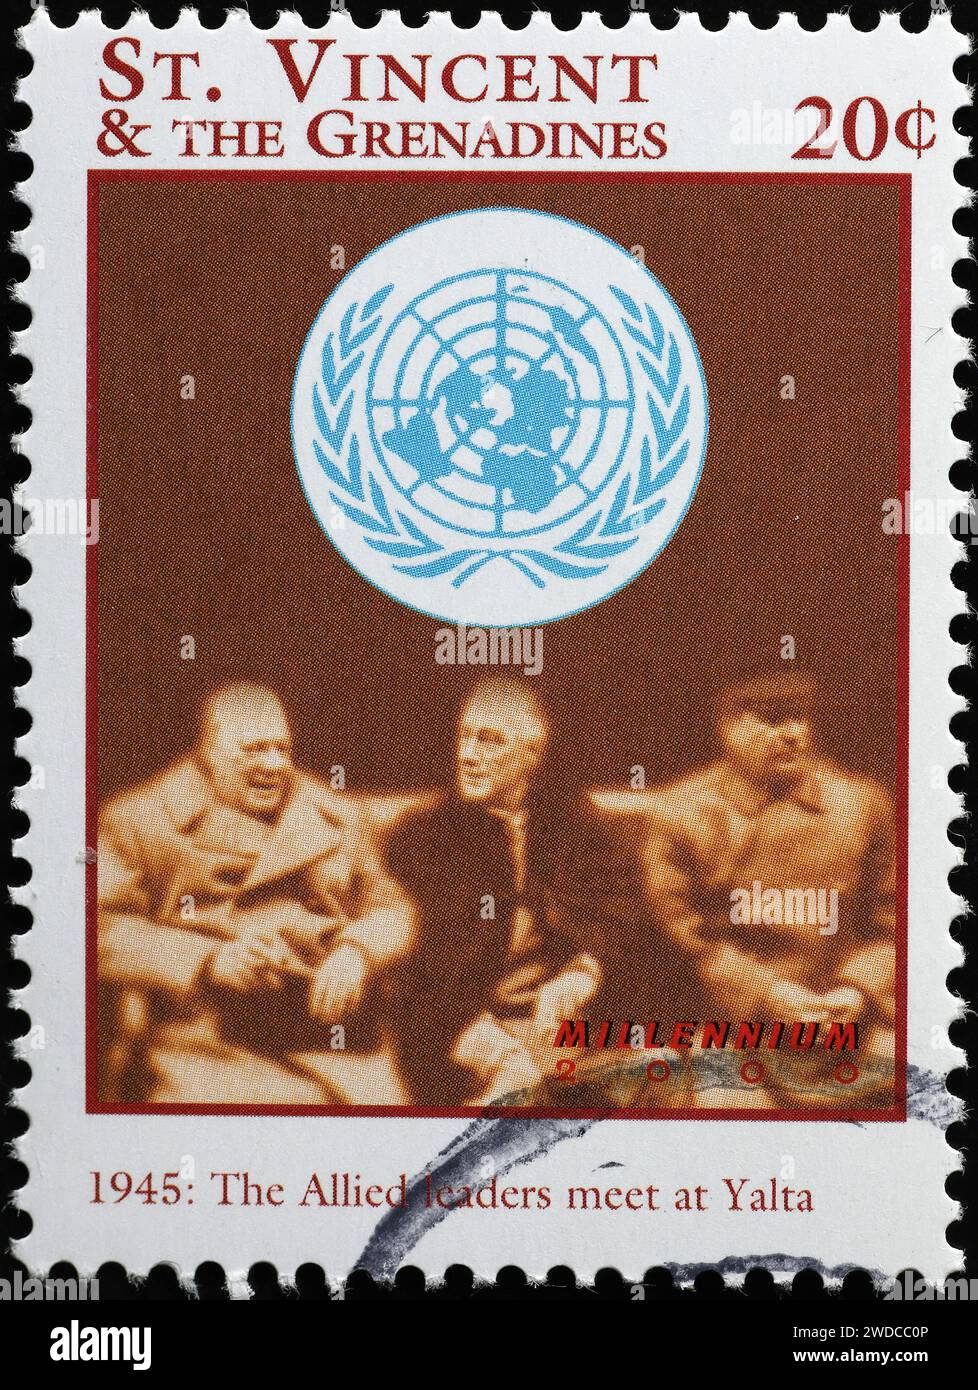 The allied leaders meet at Yalta on postage stamp Stock Photo